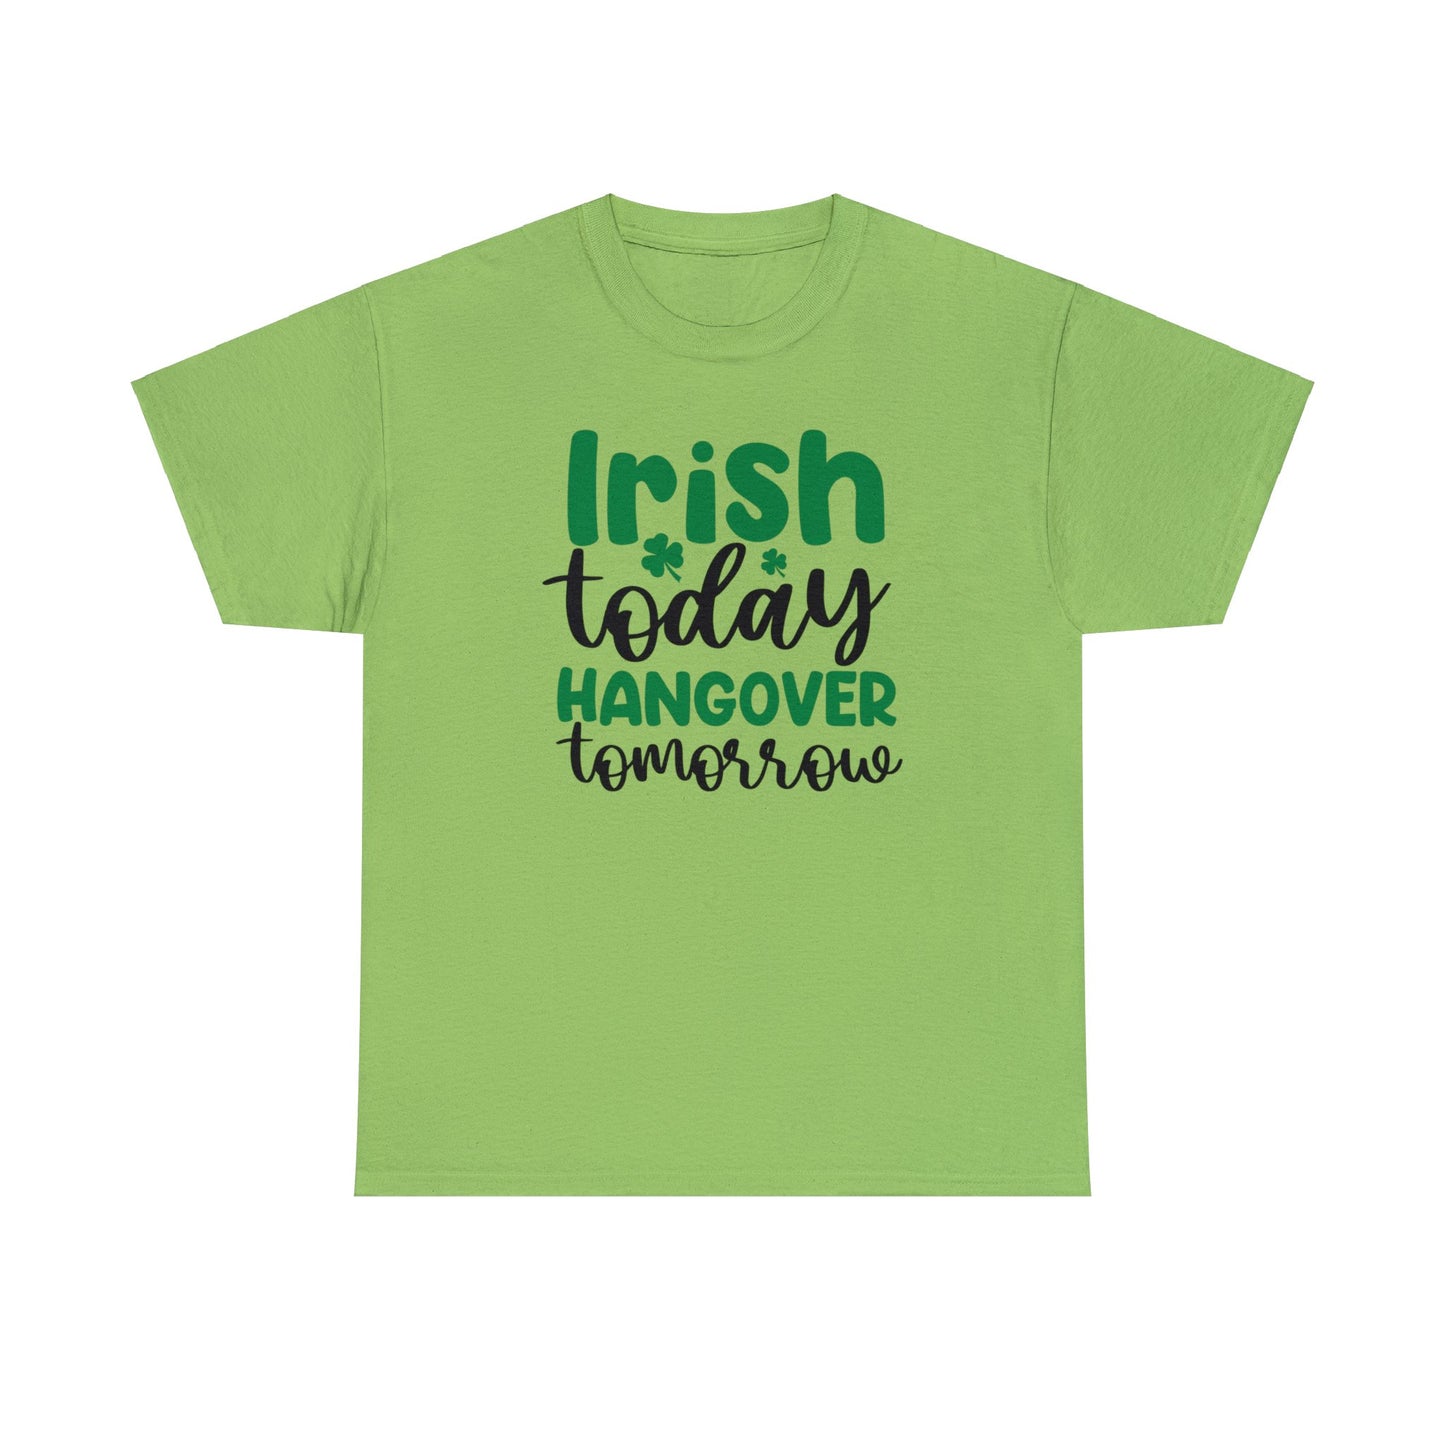 Irish Today T-Shirt For hangover T Shirt For Drinking T Shirt For St. Patrick's Day Tee